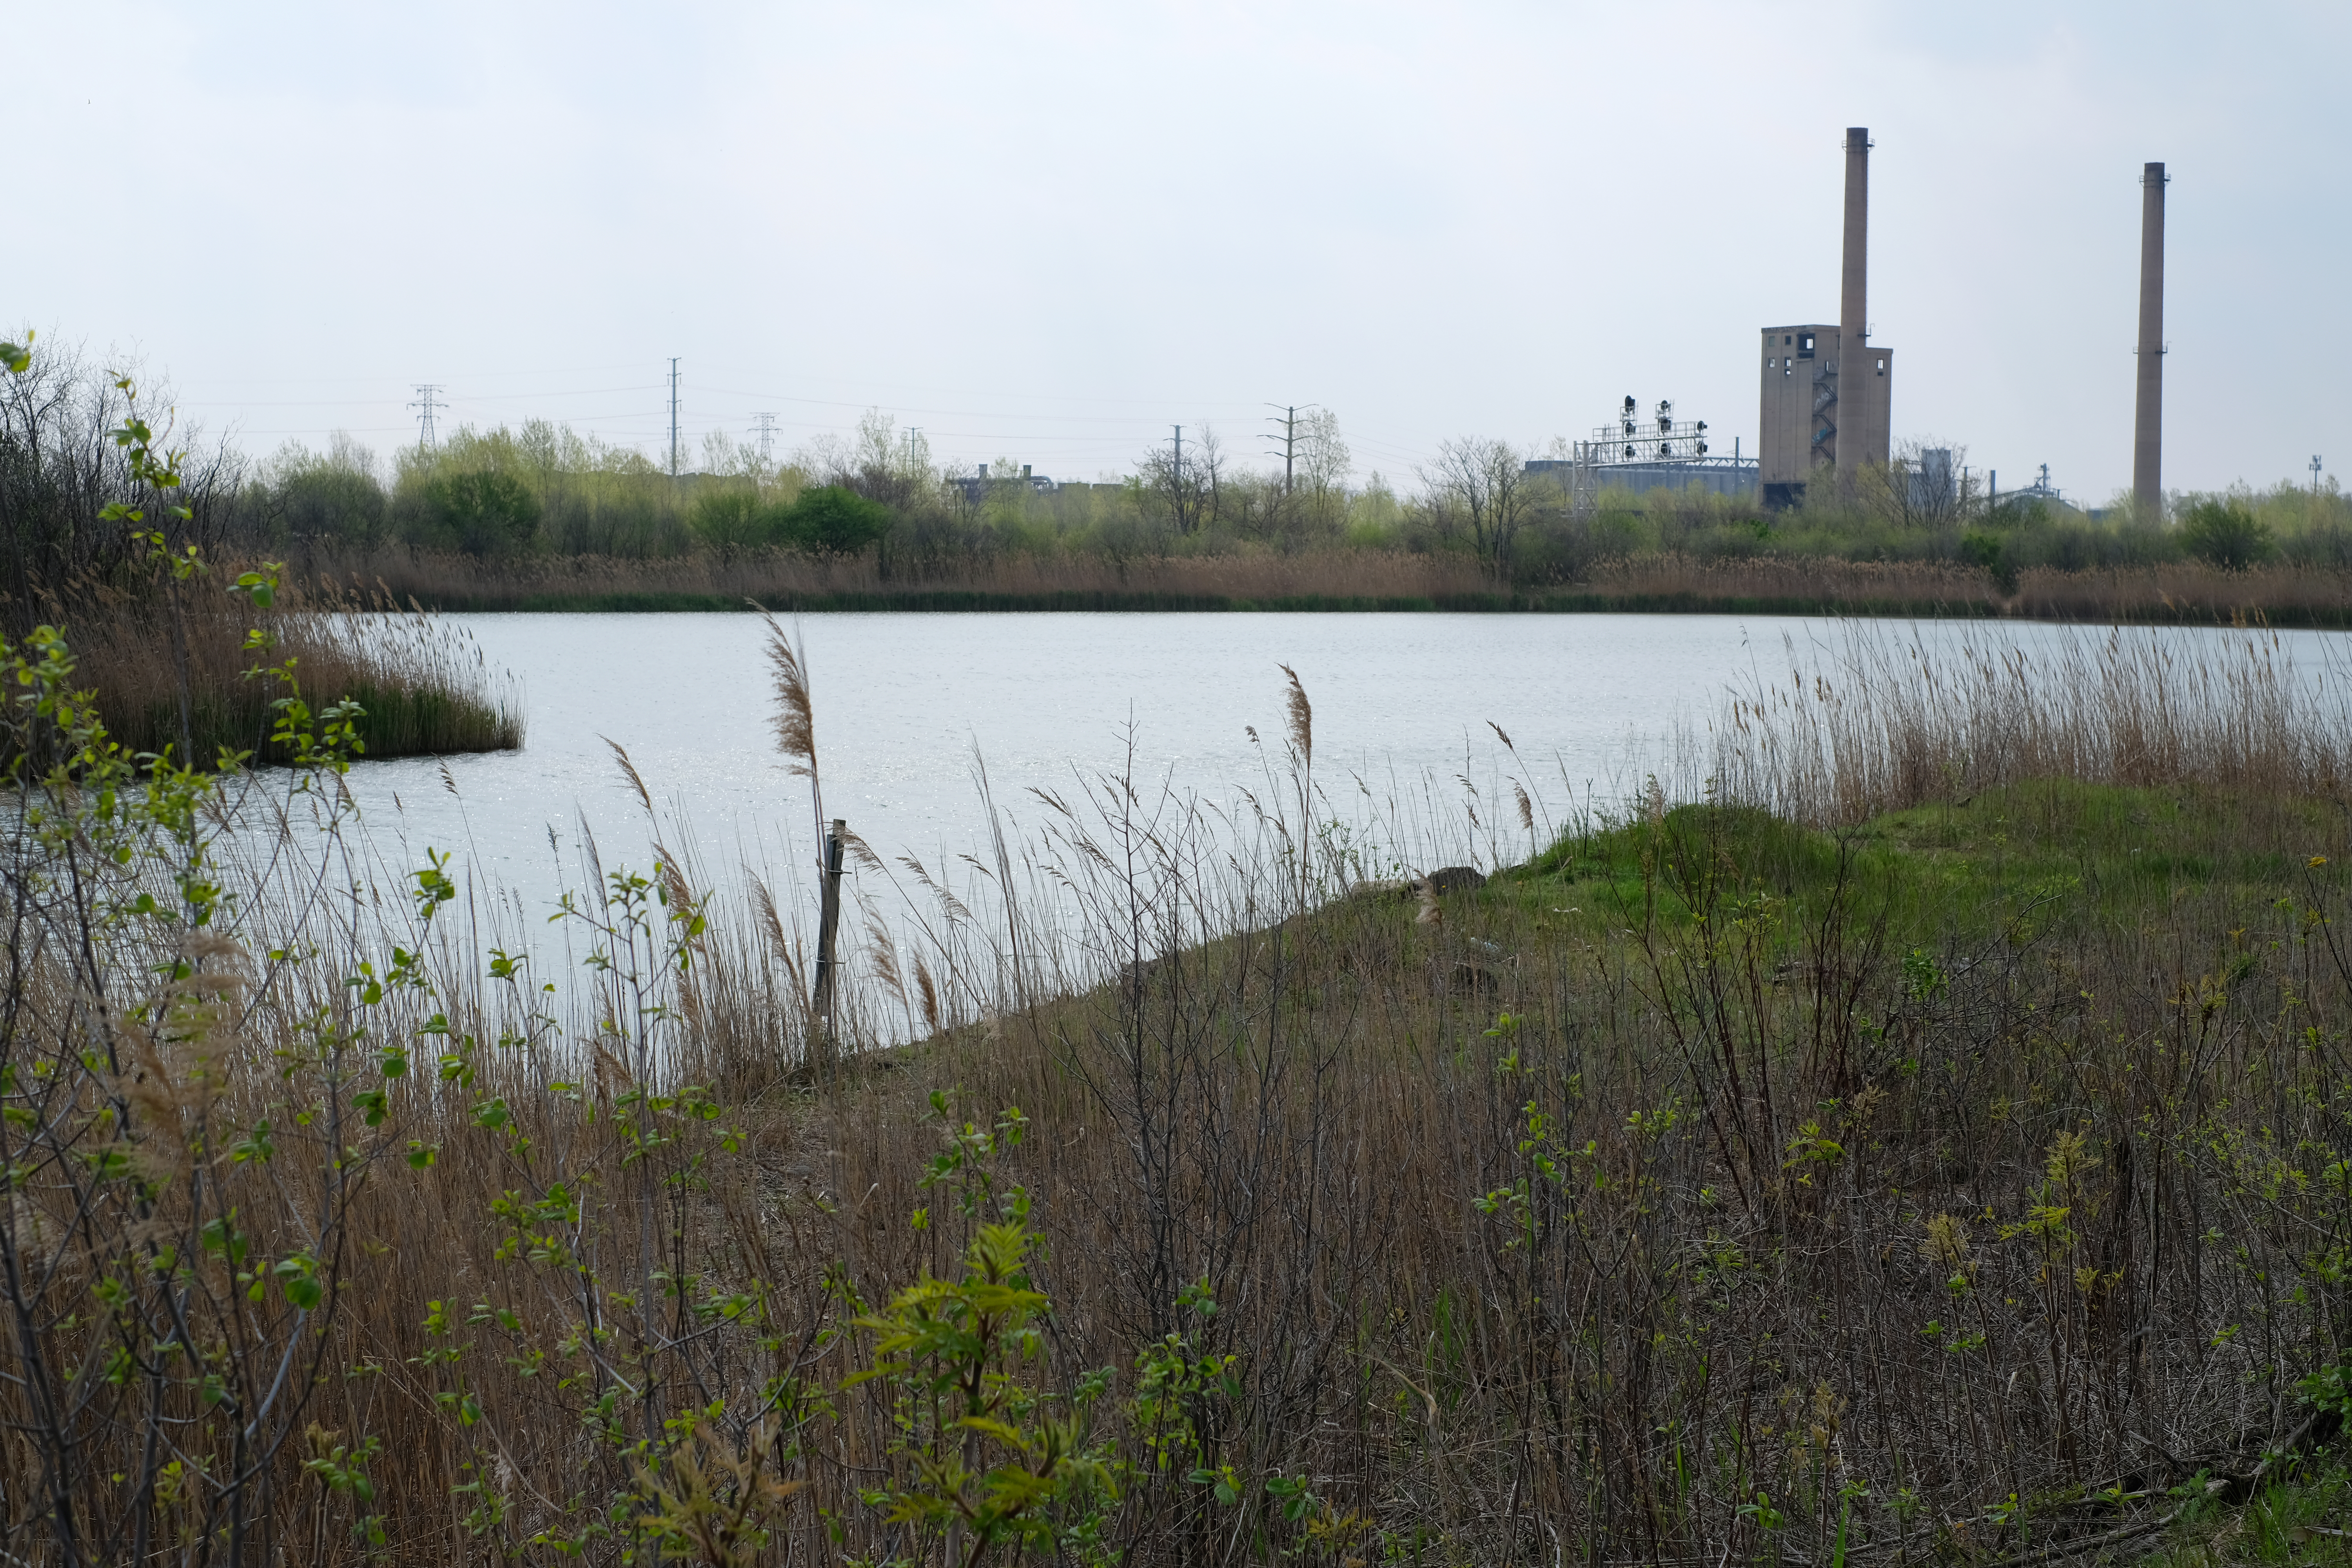 This is an image of Big Marsh in Illinois. In the foreground there are grasses. Along the right side and the background, there are more grasses, trees, and other wetland plants. In the background on the right there are industrial buildings. The open water of the marsh can be seen in the middle of this picture. The sky and water are both light gray.